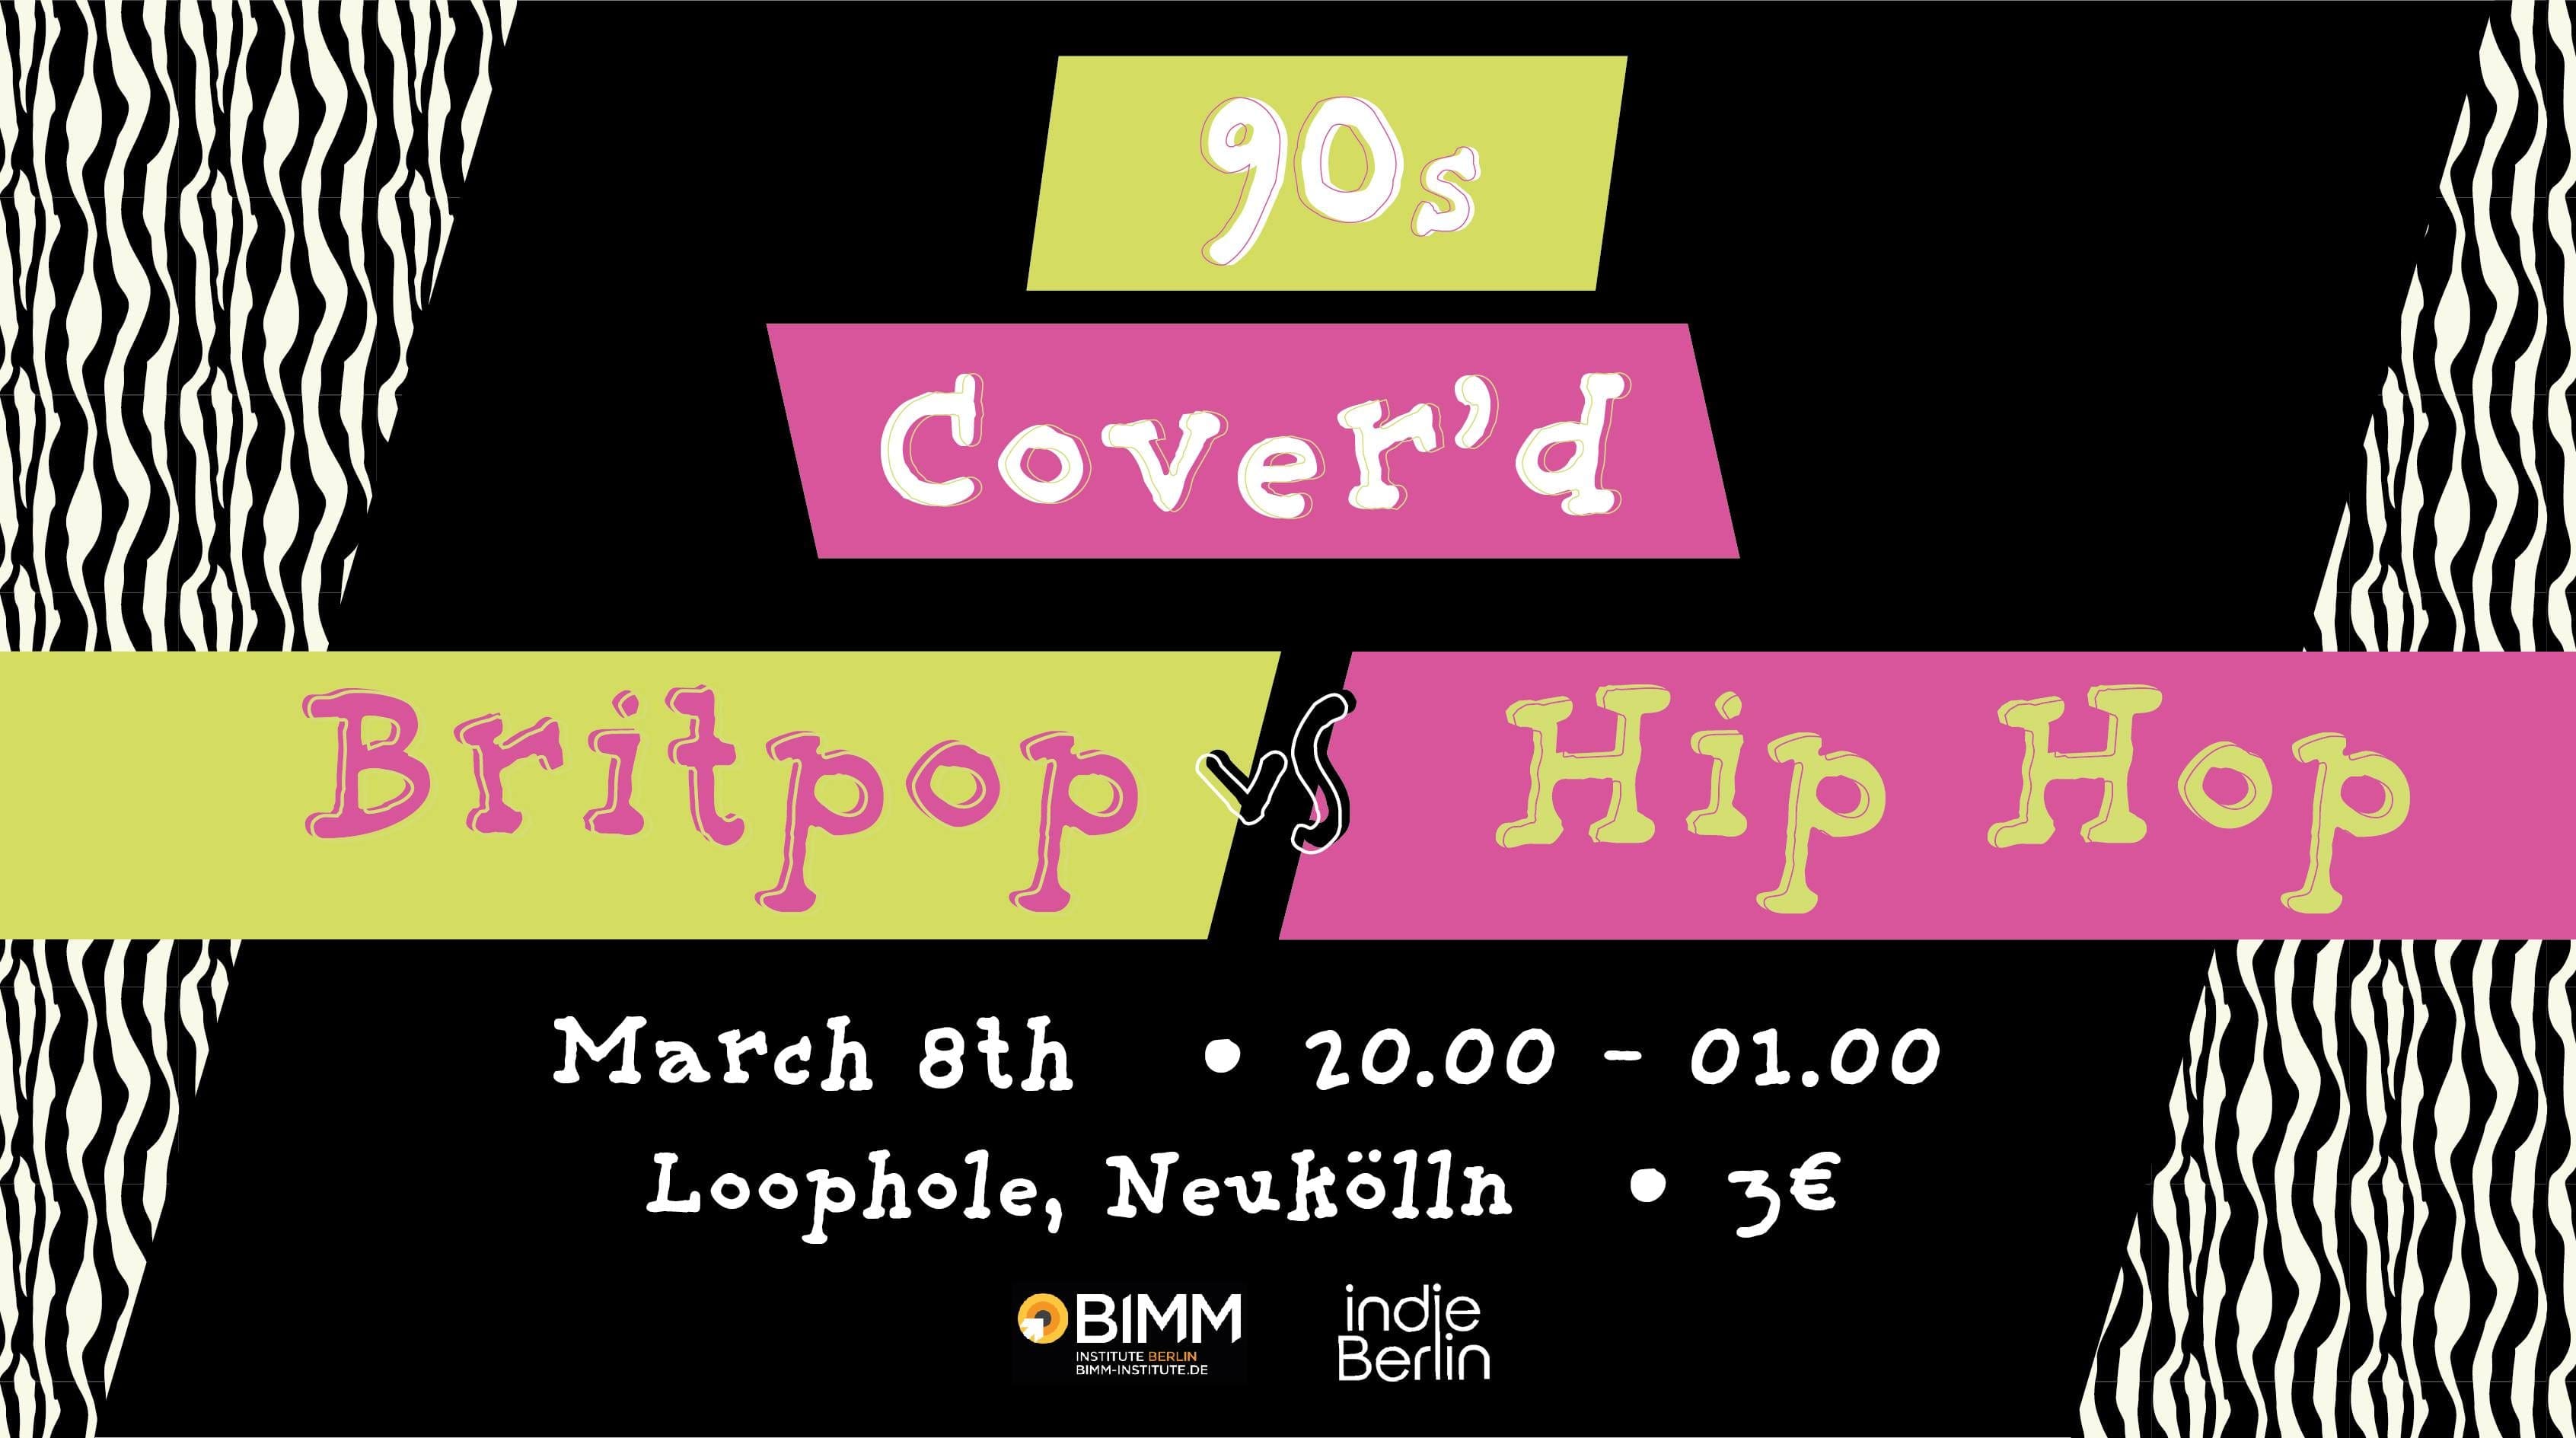 Win tickets to ’90s Cover’d: Hip Hop vs Britpop’ LIVE MUSIC nostalgia party this Friday